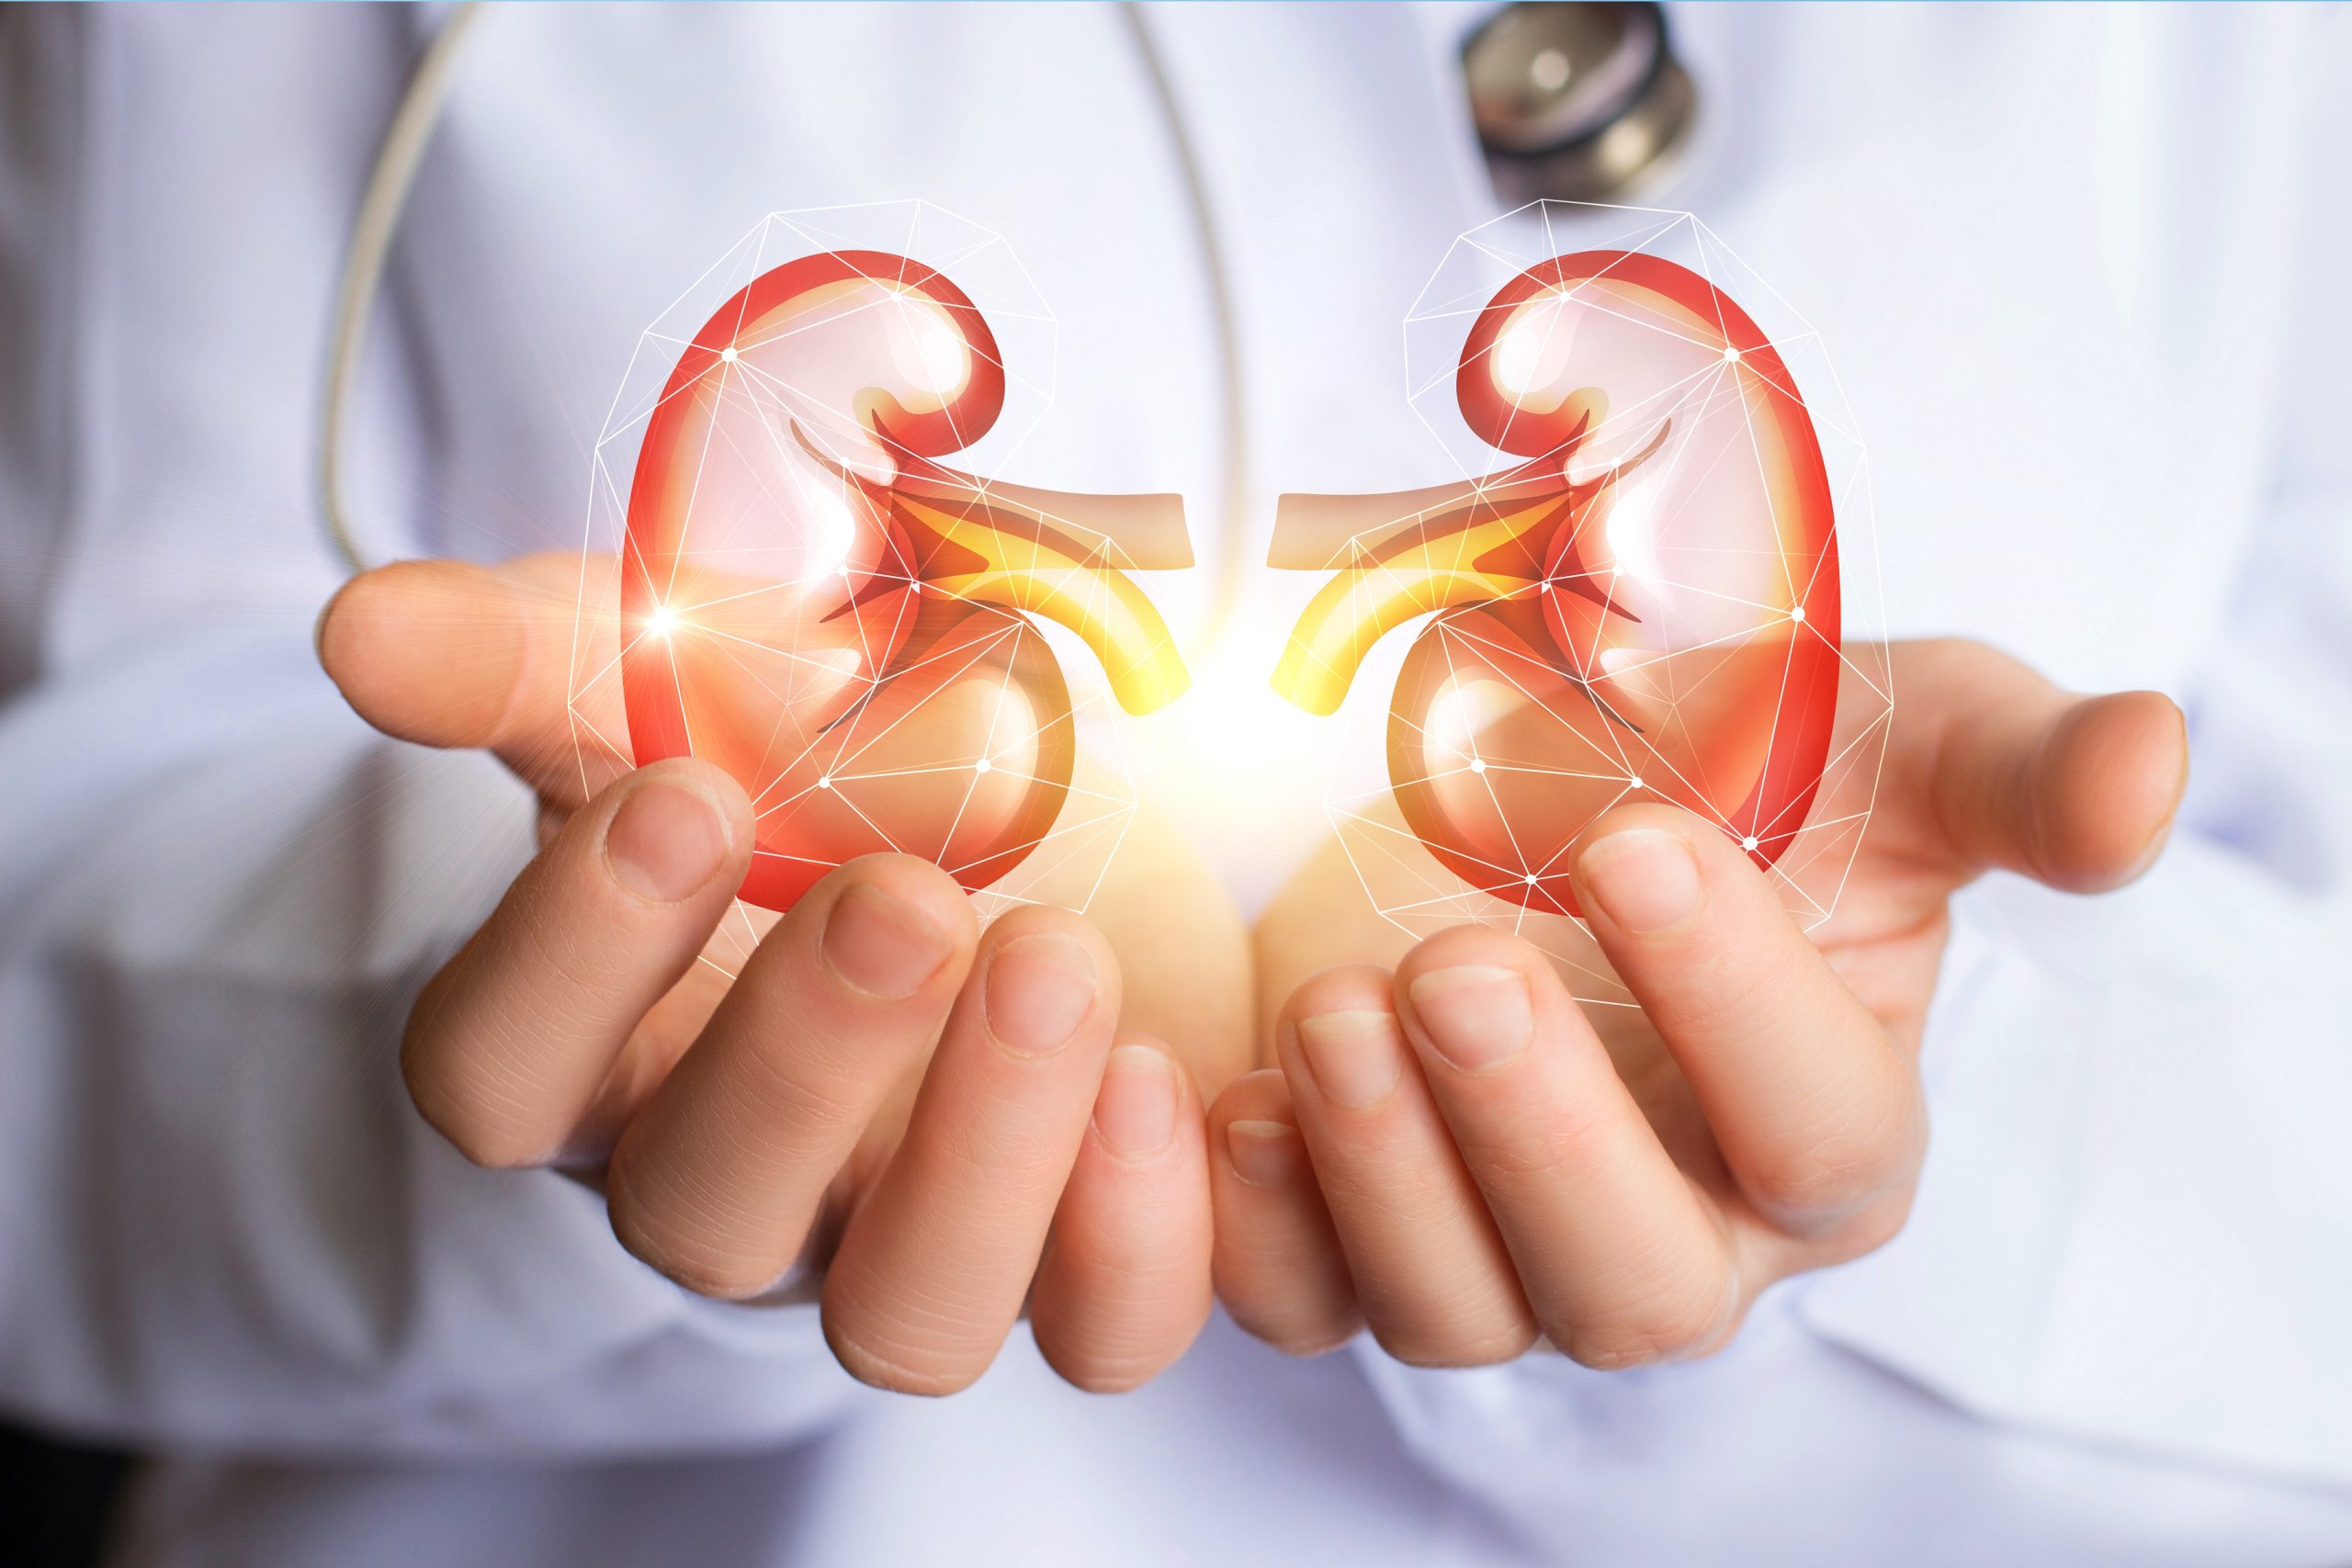 Nephrotic syndrome: a common kidney disease in children